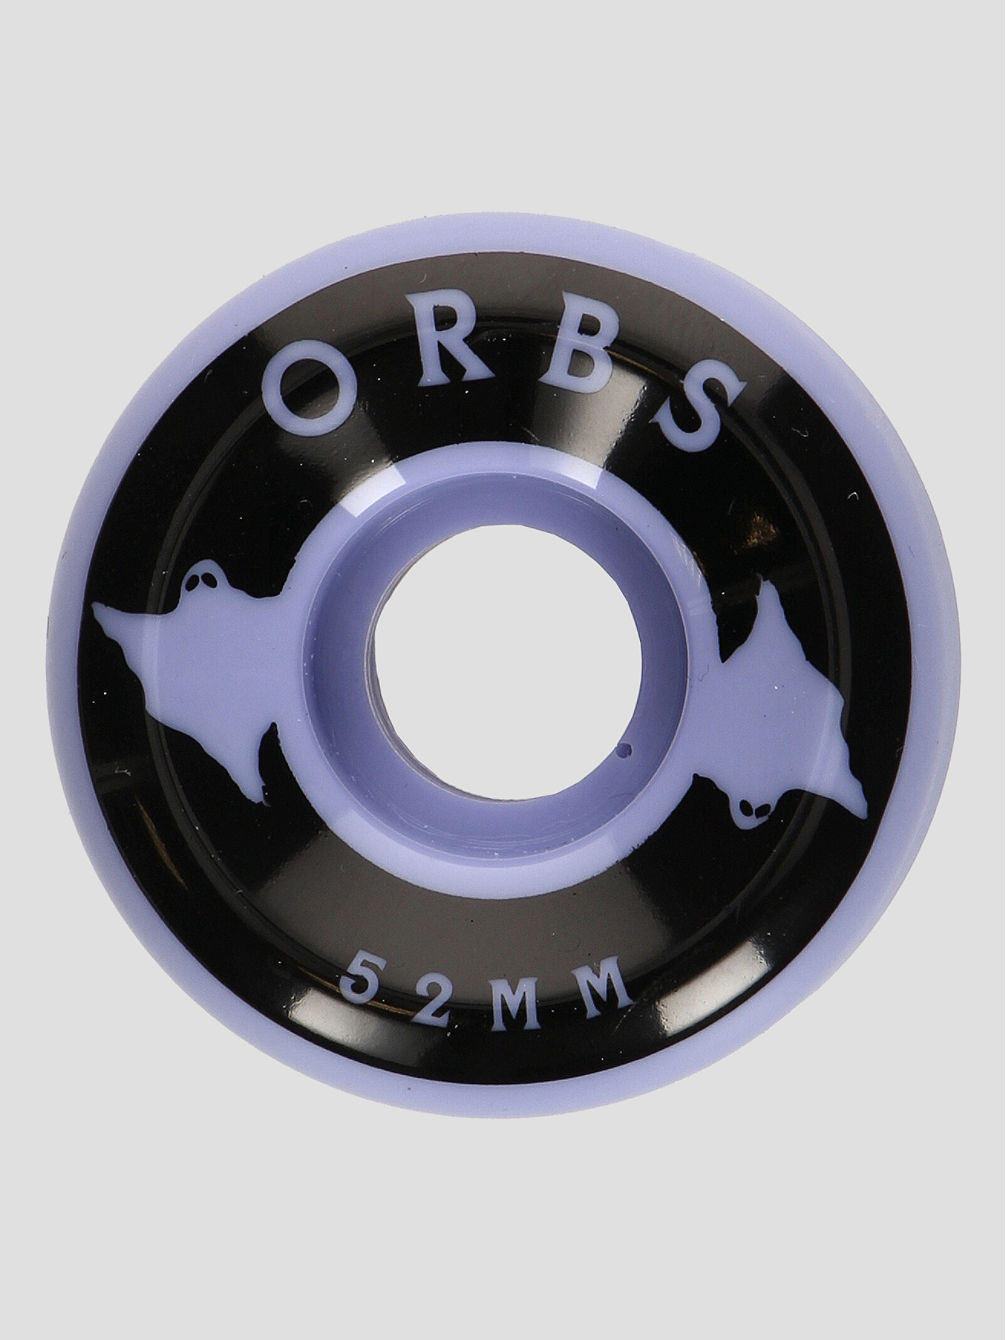 Orbs Specters - Conical - 99A 52mm Wheels